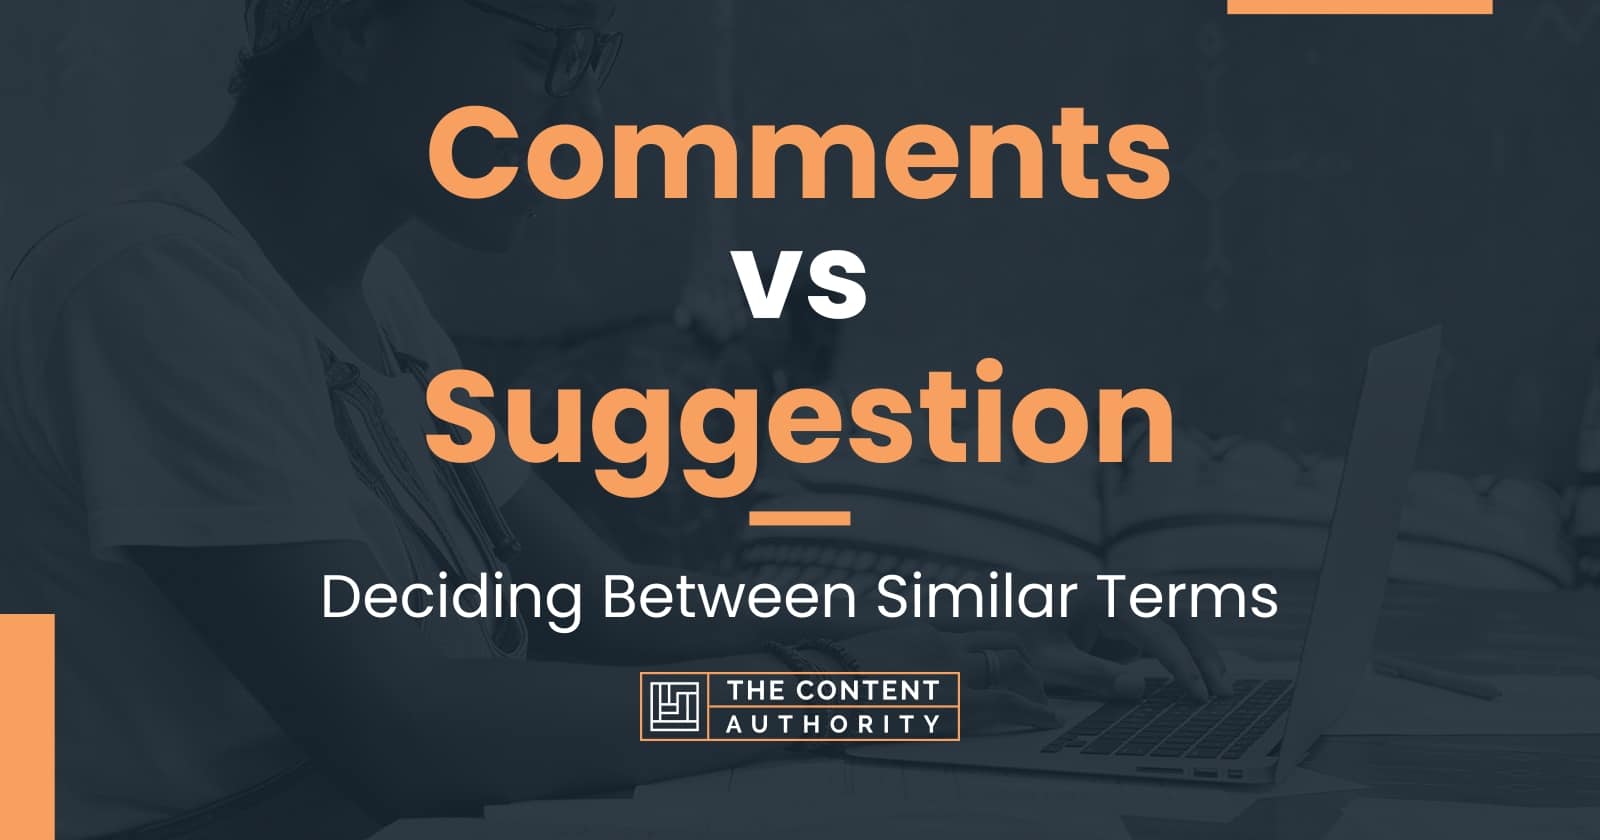 Comments vs Suggestion: Deciding Between Similar Terms